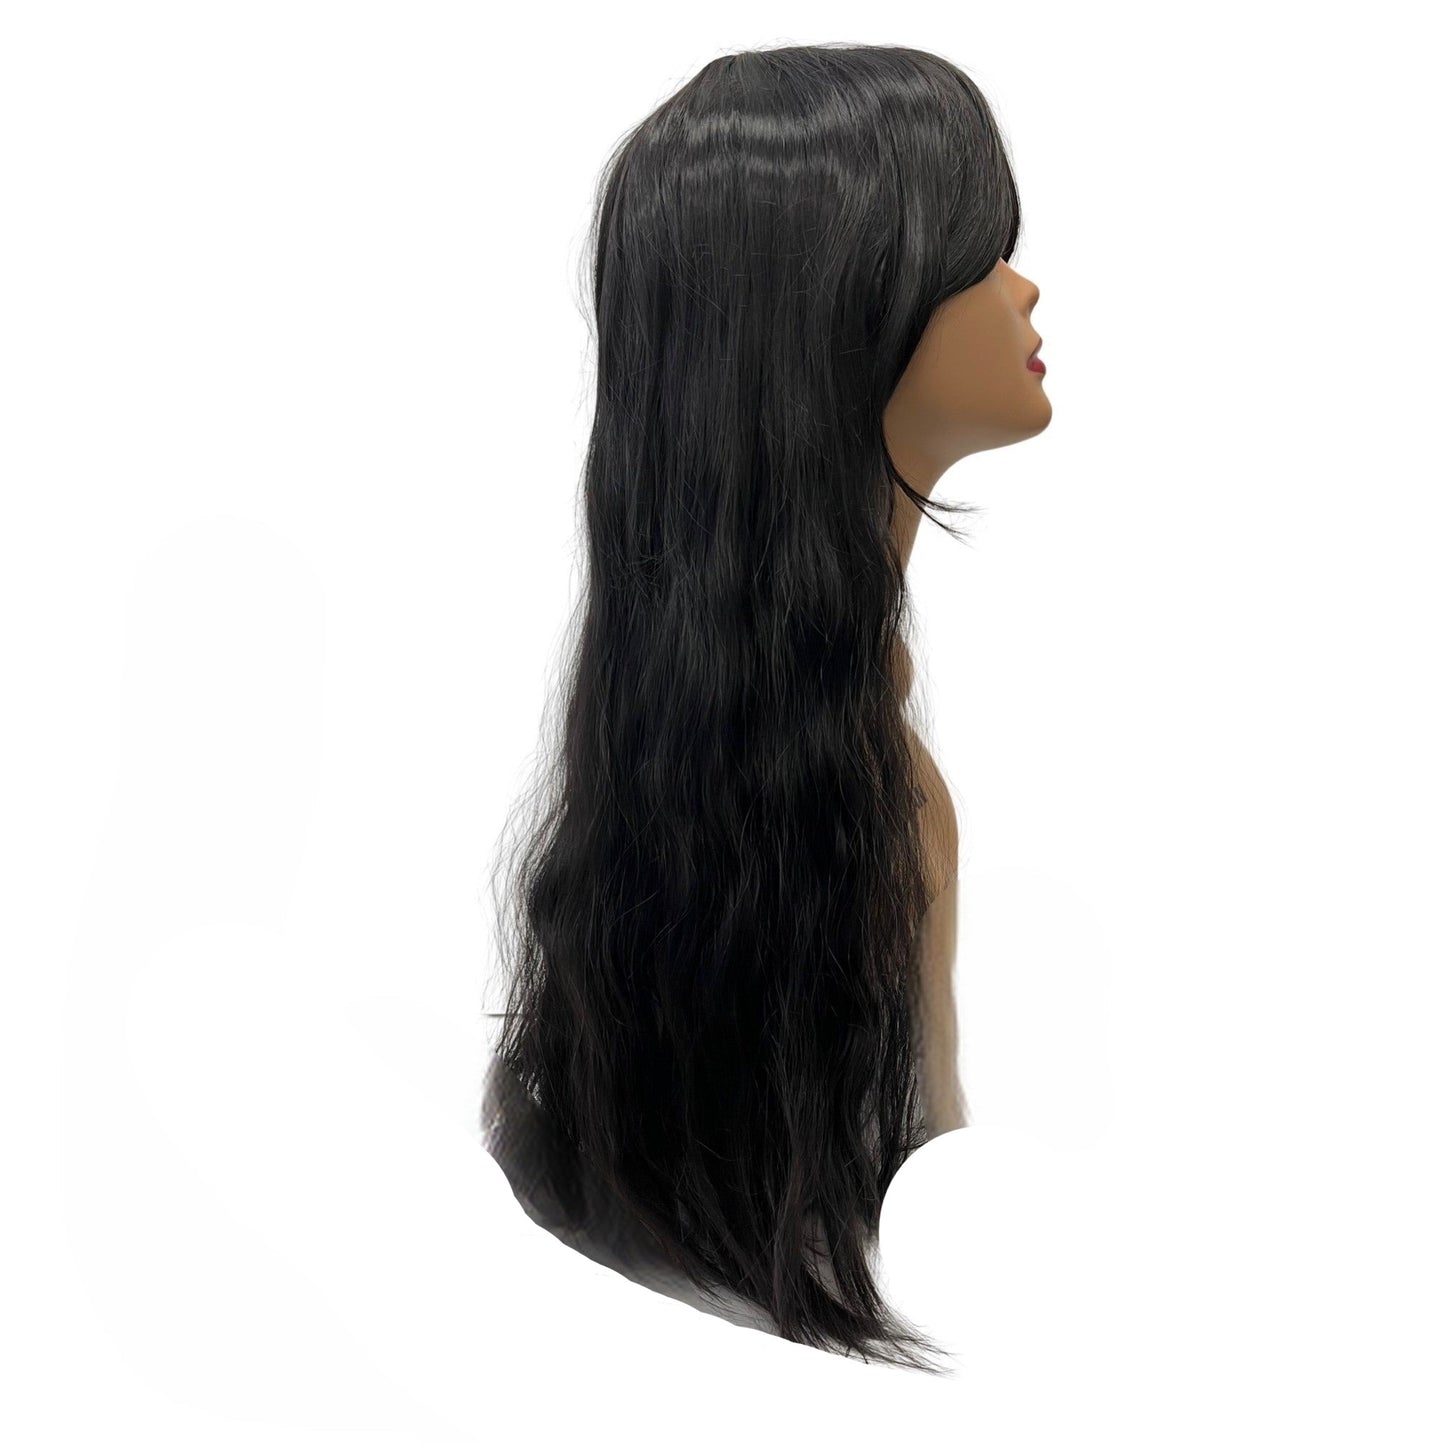 Long Synthetic Wig (#1) | A-002 | 28 inches | Durable | Breathable Cap